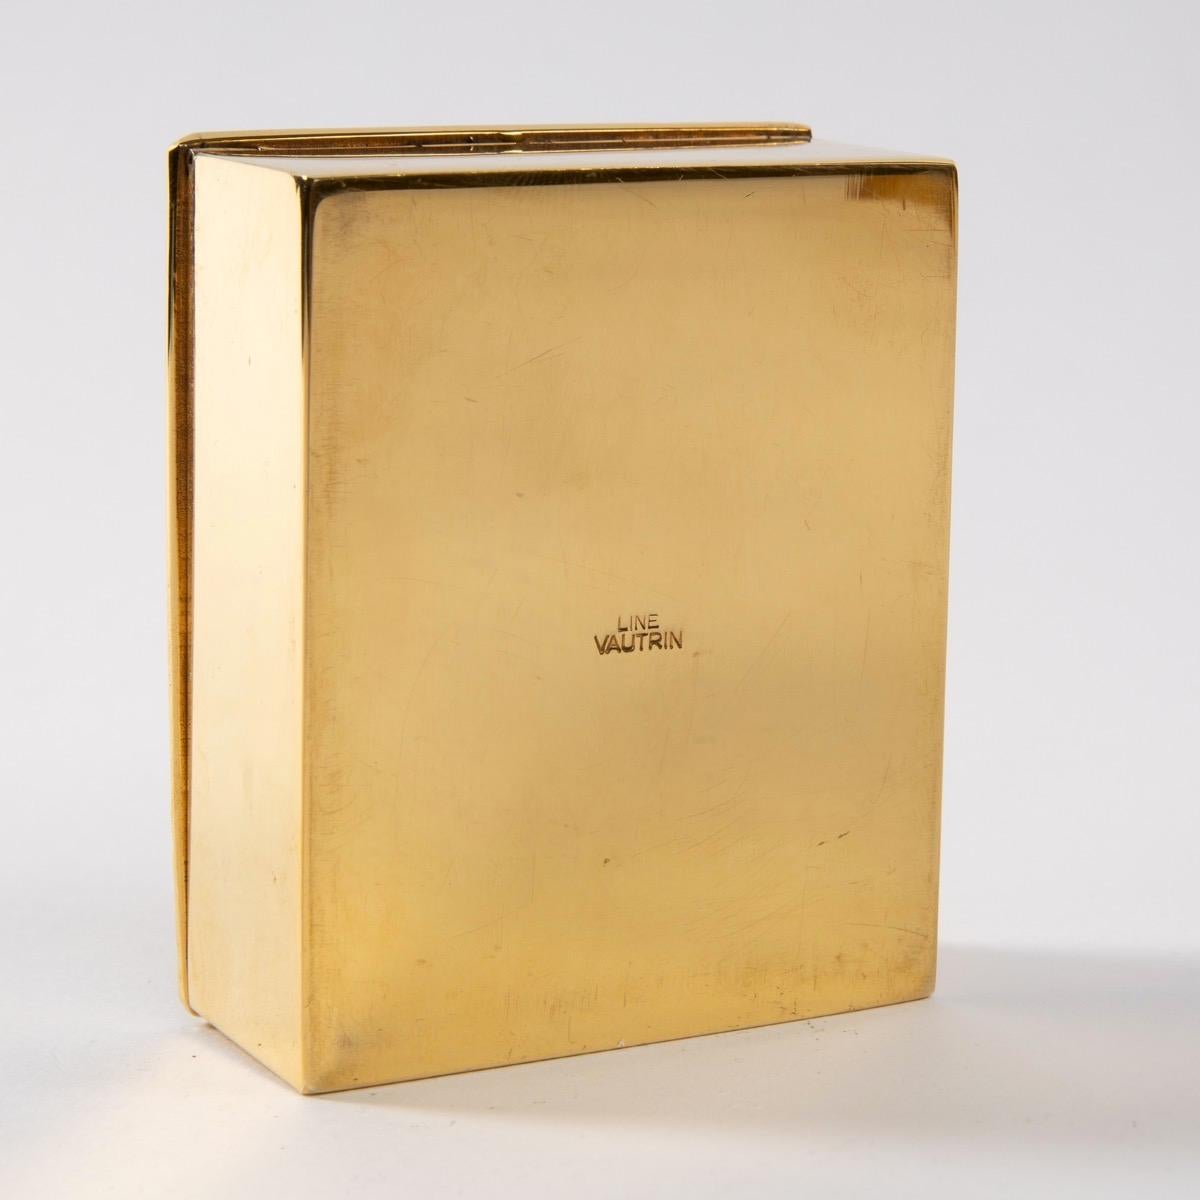 French Line Vautrin, France, Dachshund Tout Ou Rien 'All or Nothing' Box, Gilded Bronze